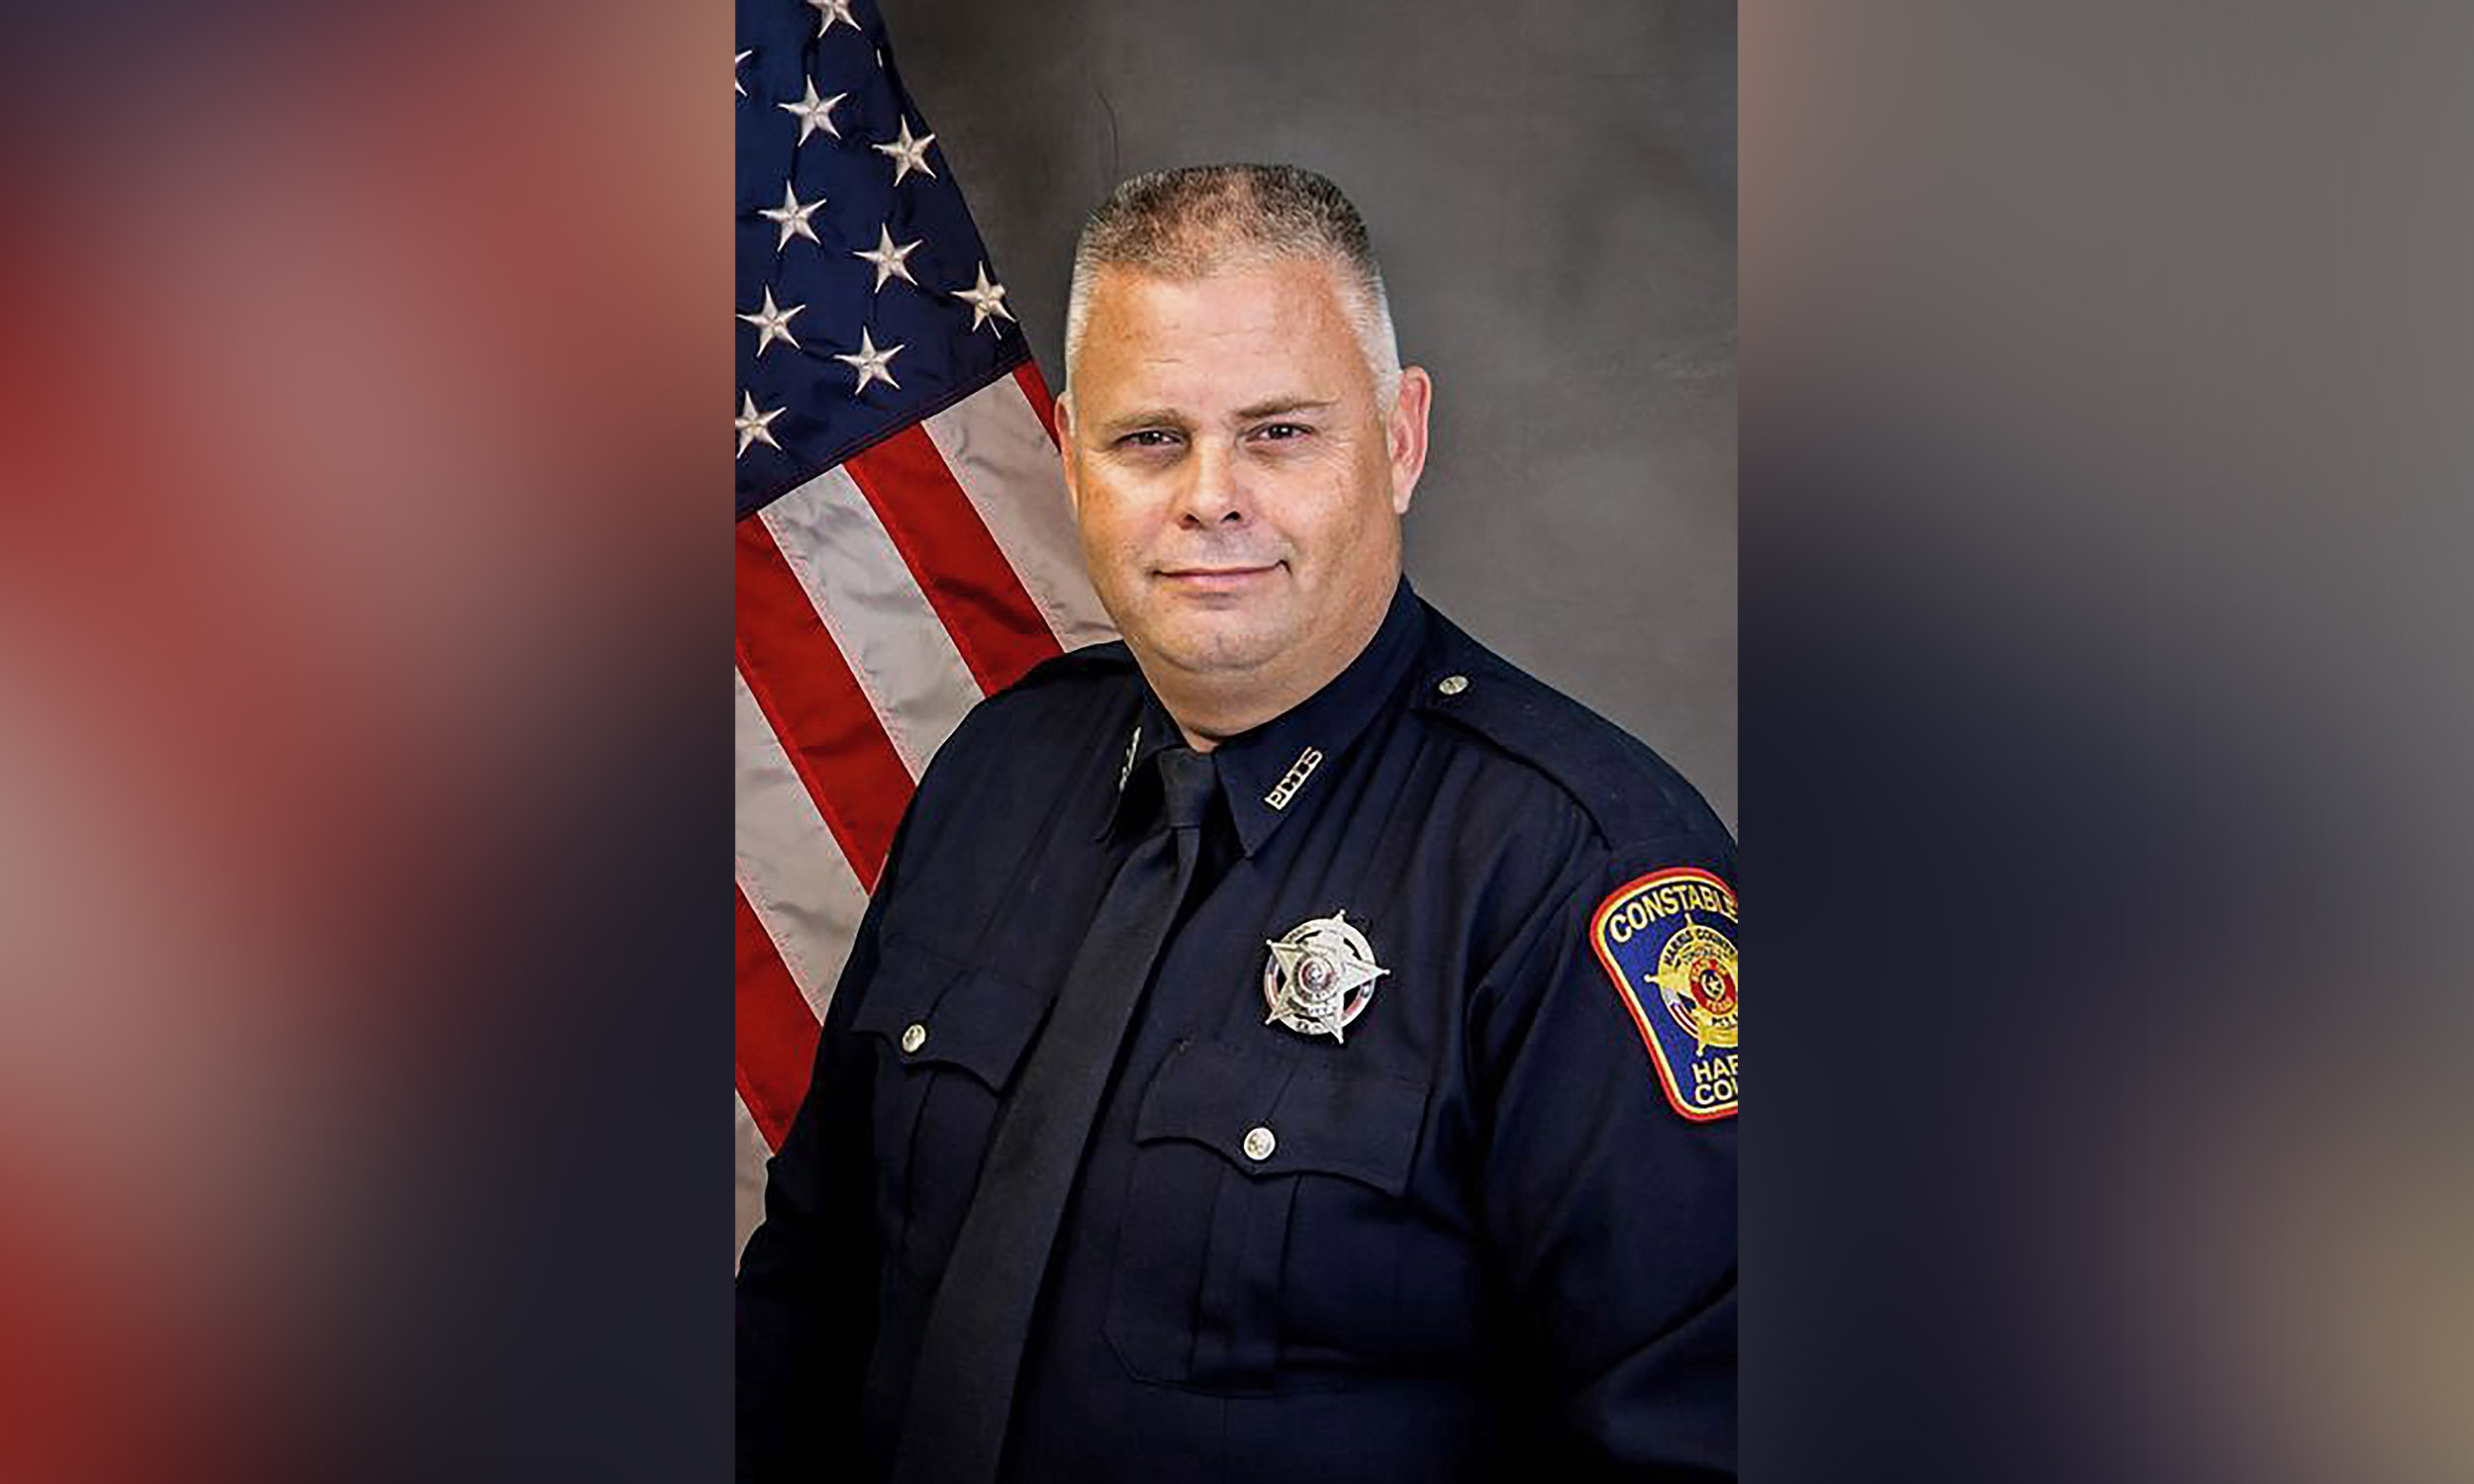 PHOTO: Constable Cpl. Charles Galloway is pictured in this undated photo provided by the Harris County, Texas Constable Precinct. He was fatally shot during a traffic stop in Houston, on Jan. 23, 2022.